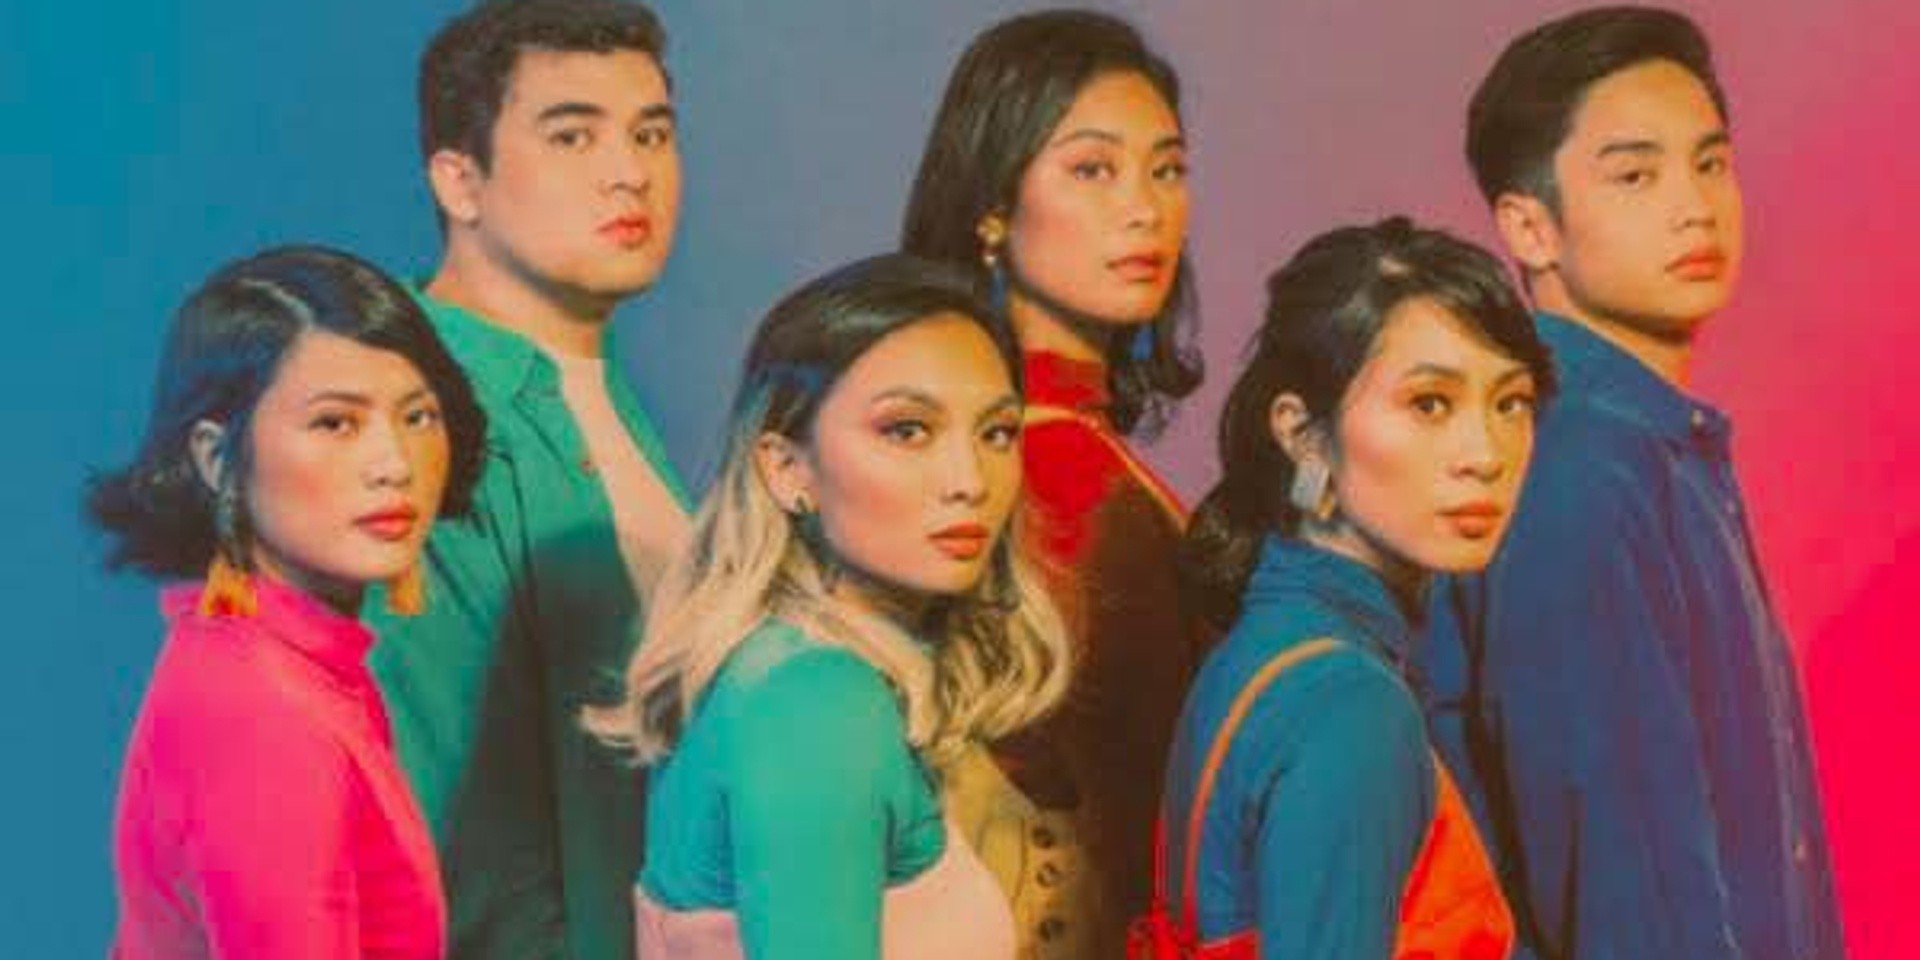 The Ransom Collective return with new single, 'I Don't Care' – listen